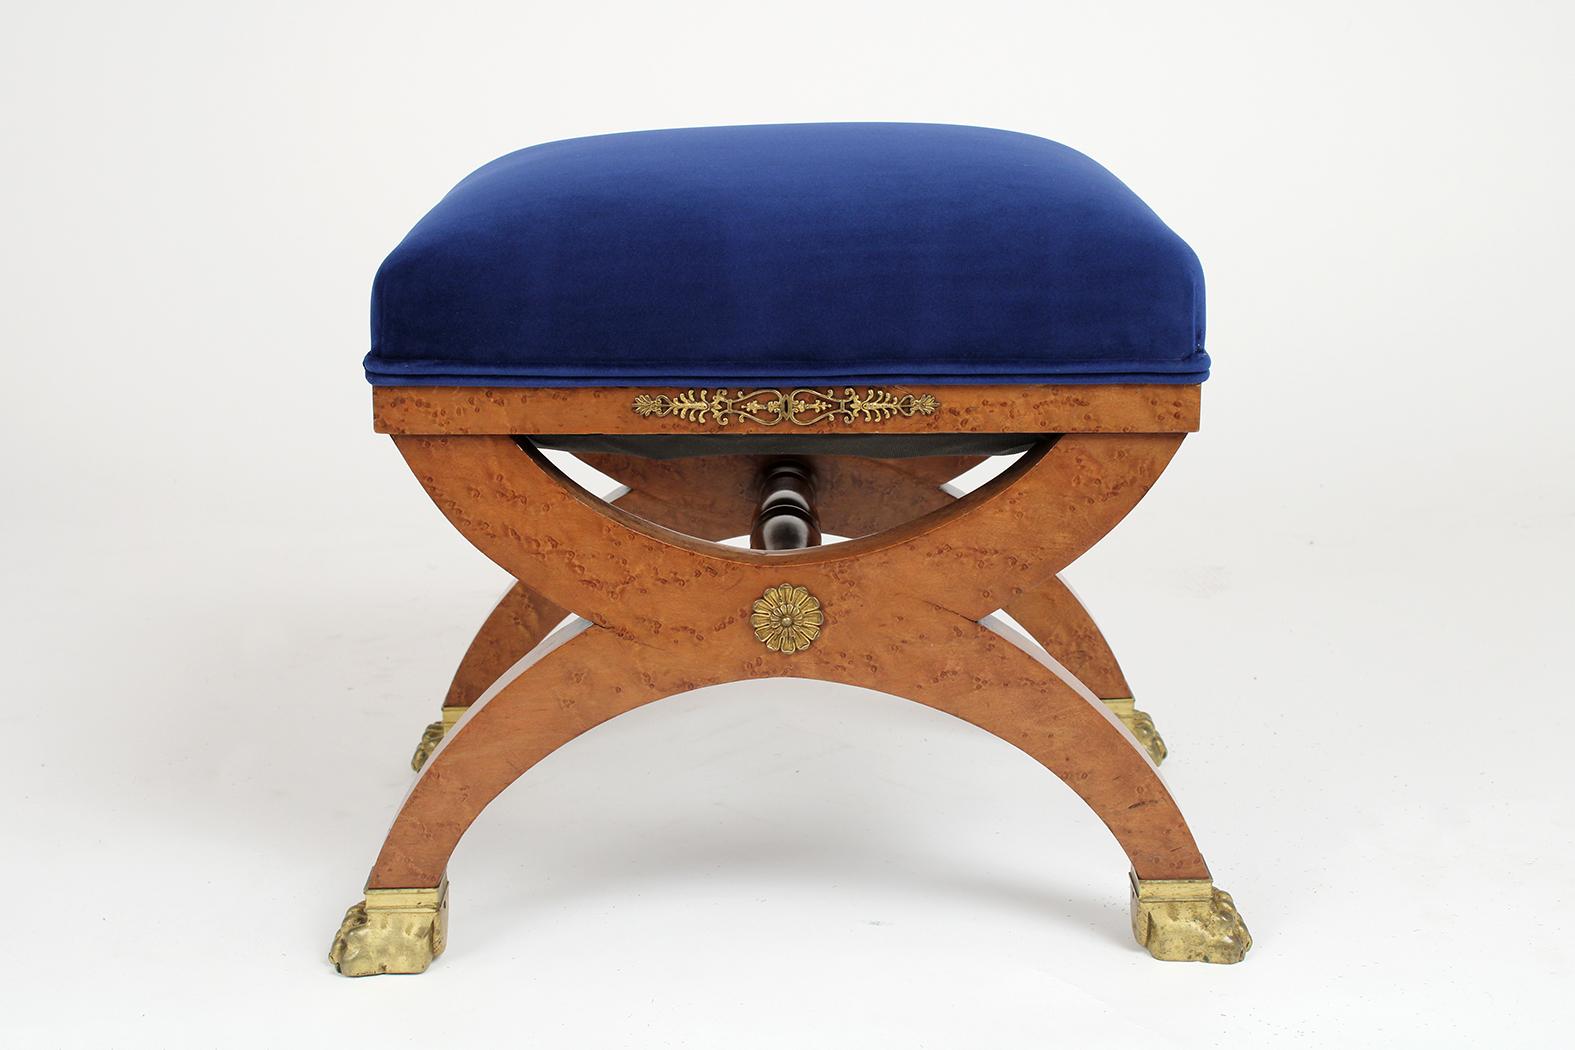 This French 19th century Empire style stool is made out of maple wood covered with a beautiful exotics burl veneer and has been professionally restored. This petite stool has been newly upholstered in blue velvet fabric with double piping detail.